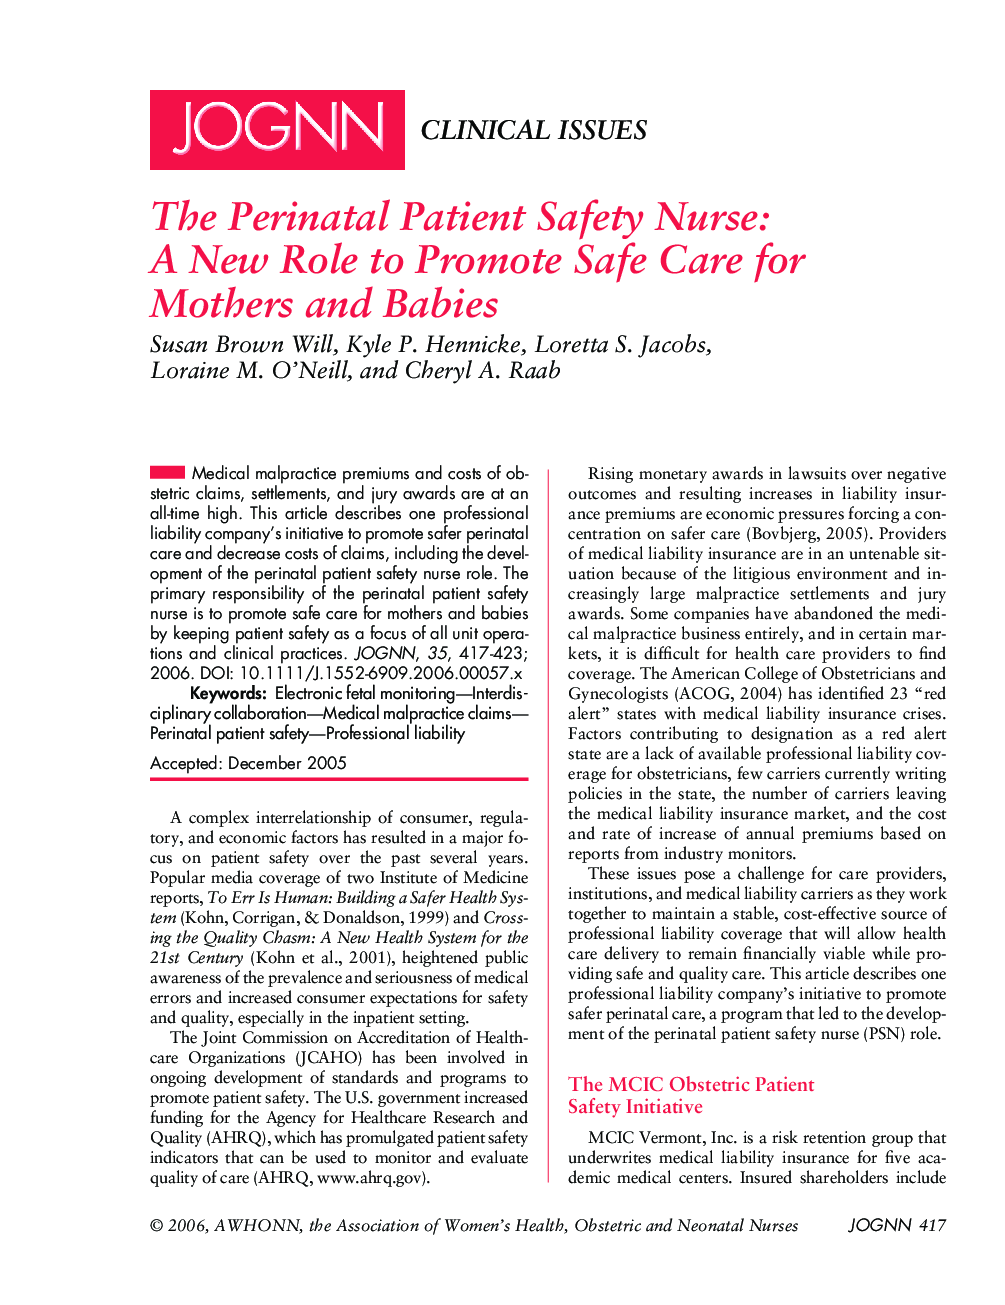 The Perinatal Patient Safety Nurse: A New Role to Promote Safe Care for Mothers and Babies